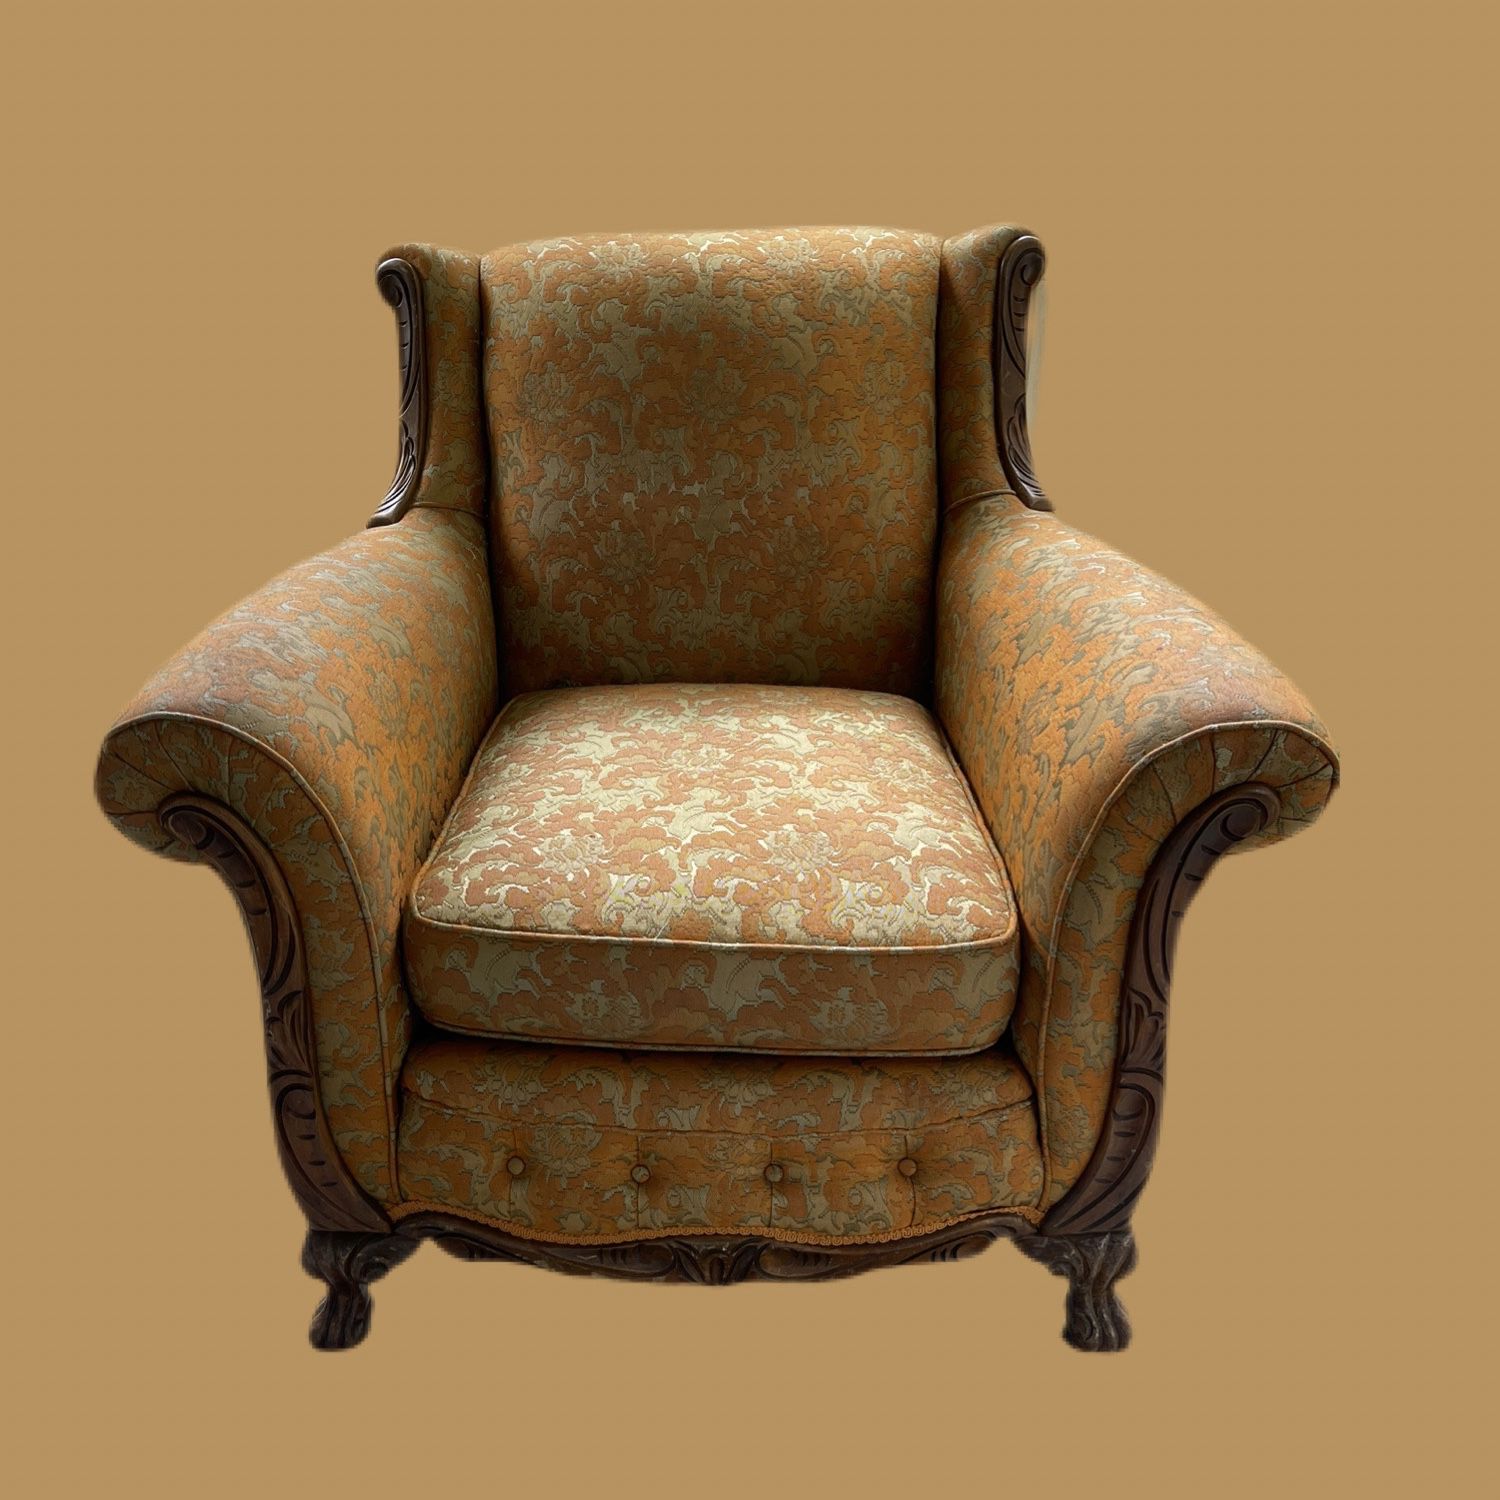 Late 19th/Early 20th Centuries/ French Louis XV Style Chair